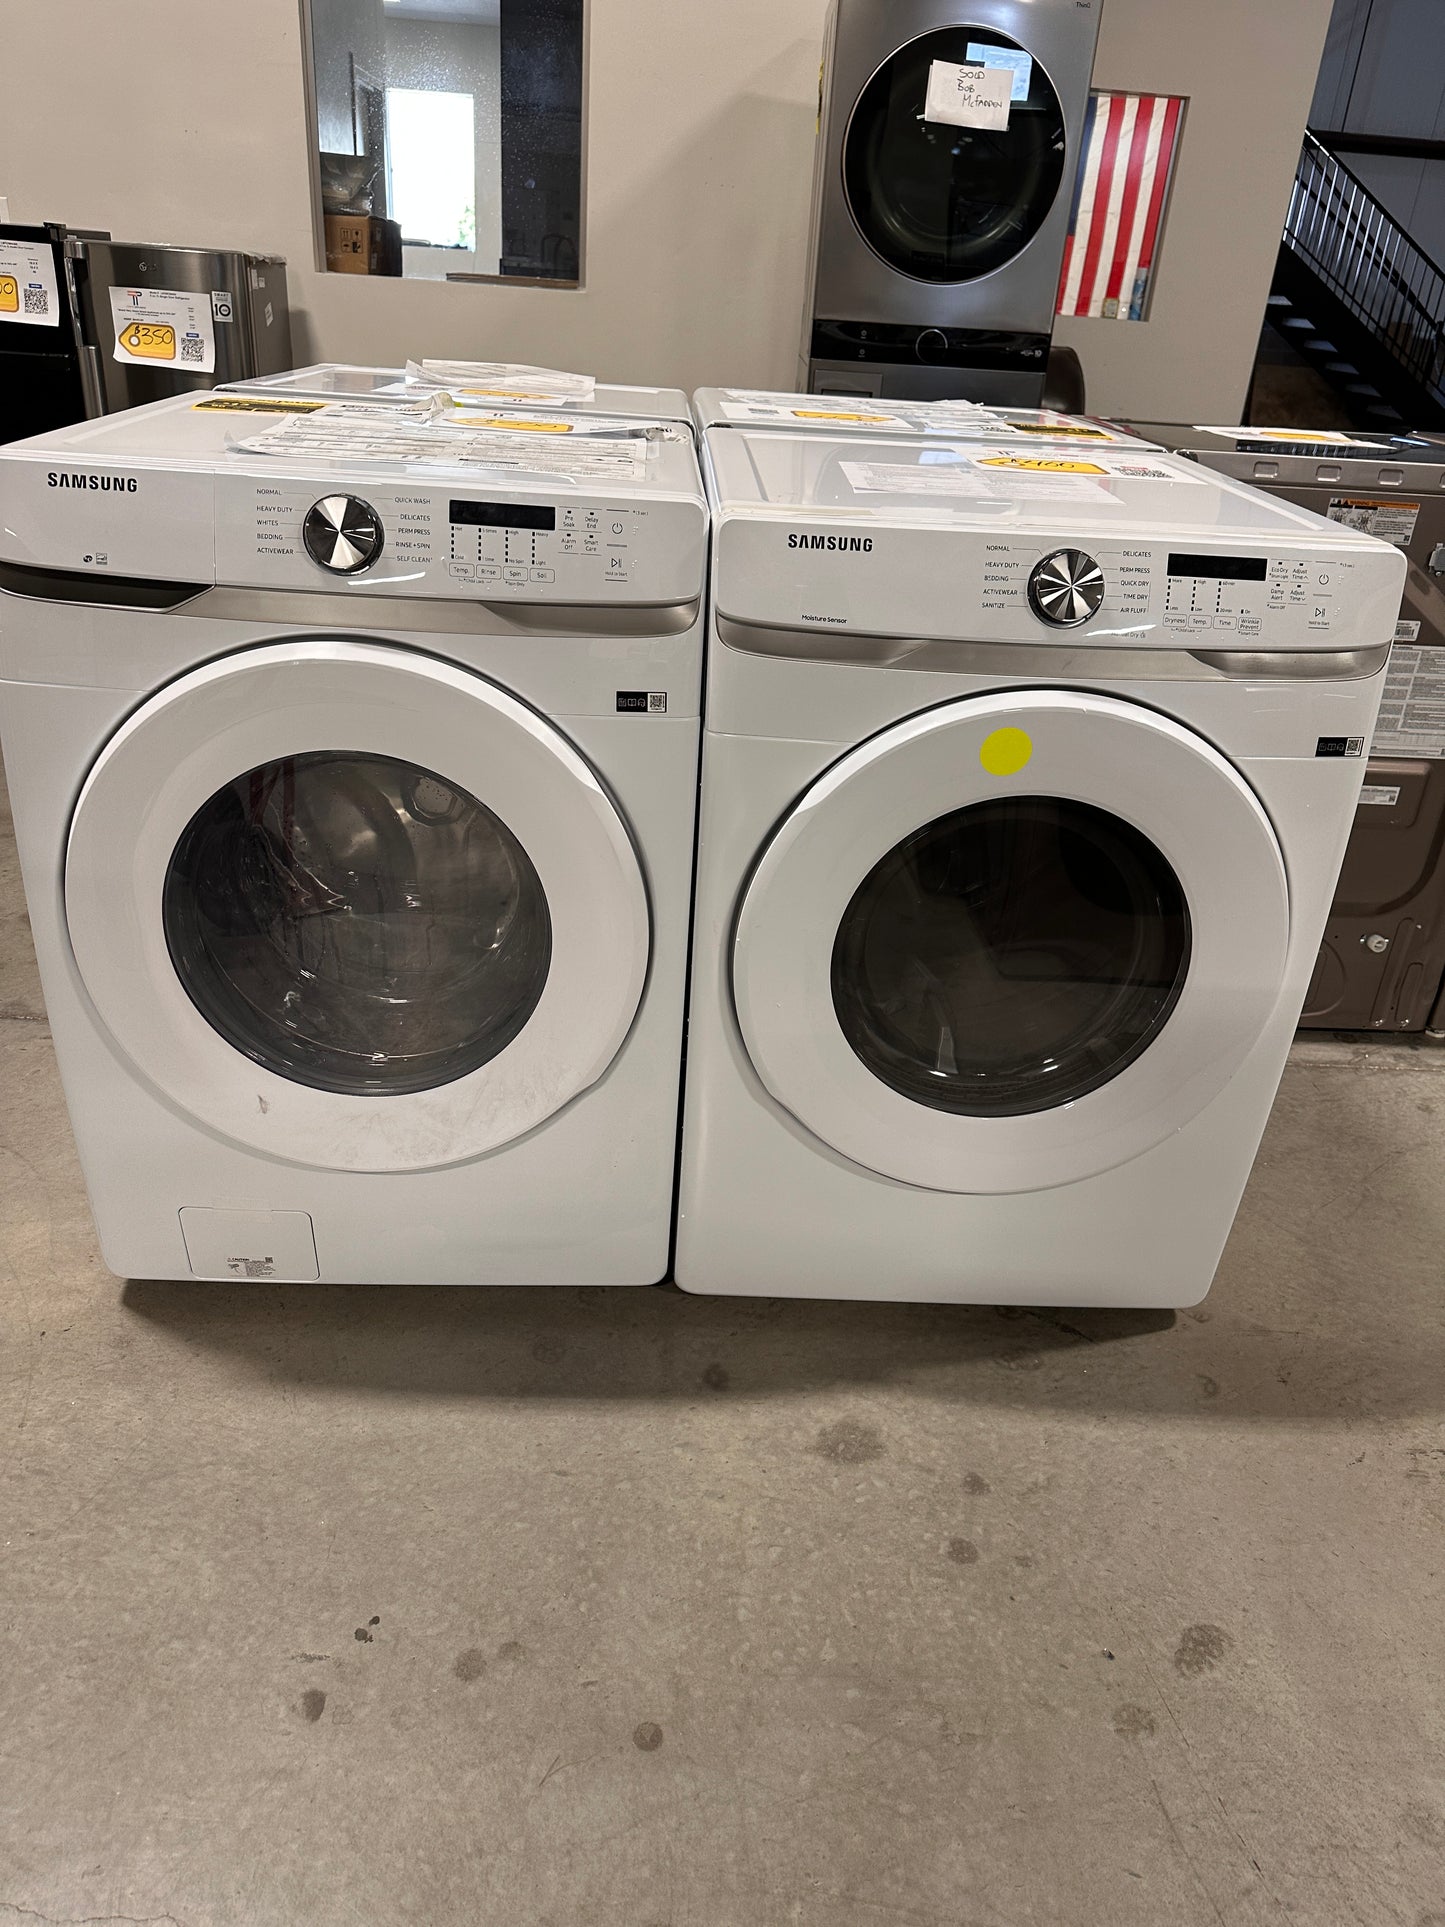 STACKABLE BRAND NEW SAMSUNG LAUNDRY SET - WAS13143 DRY12461